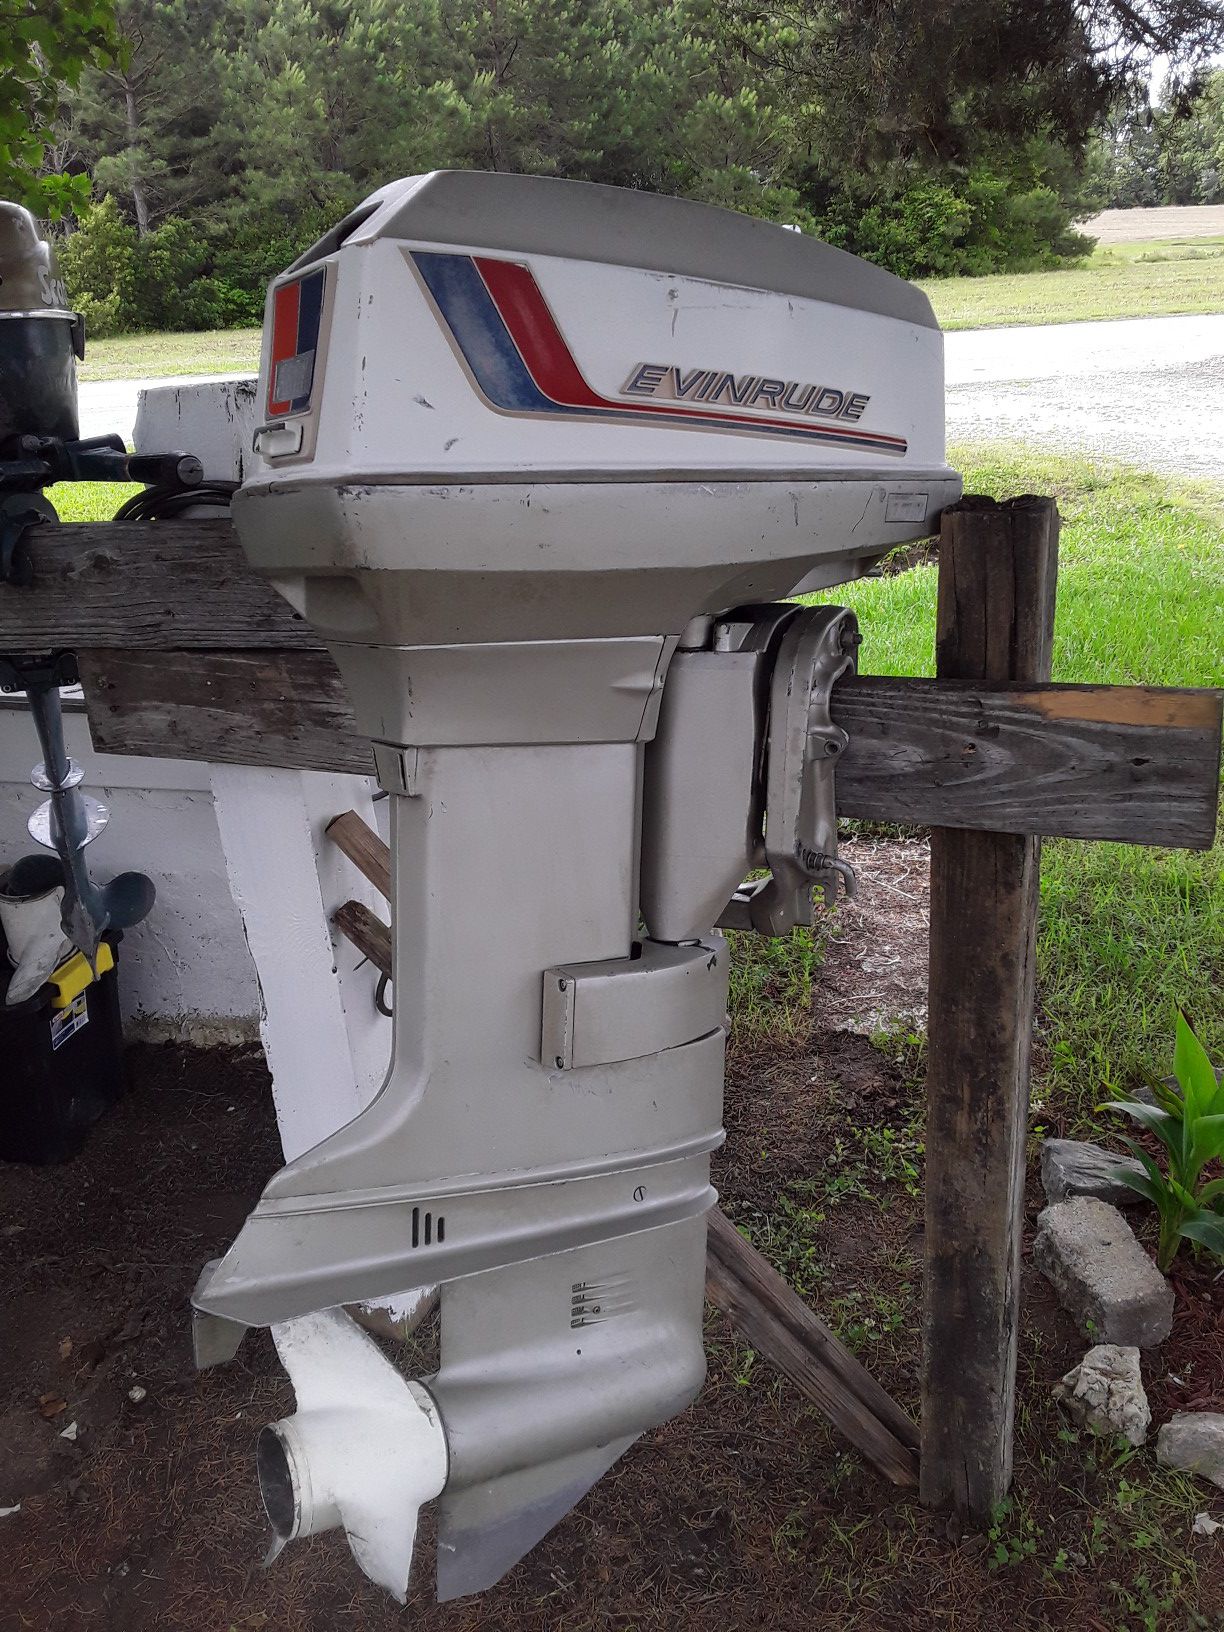 REWARD OFFERED**Evinrude!** HELP**these motors were Stolen from my place! INFO on who /what / where gets REWARD!